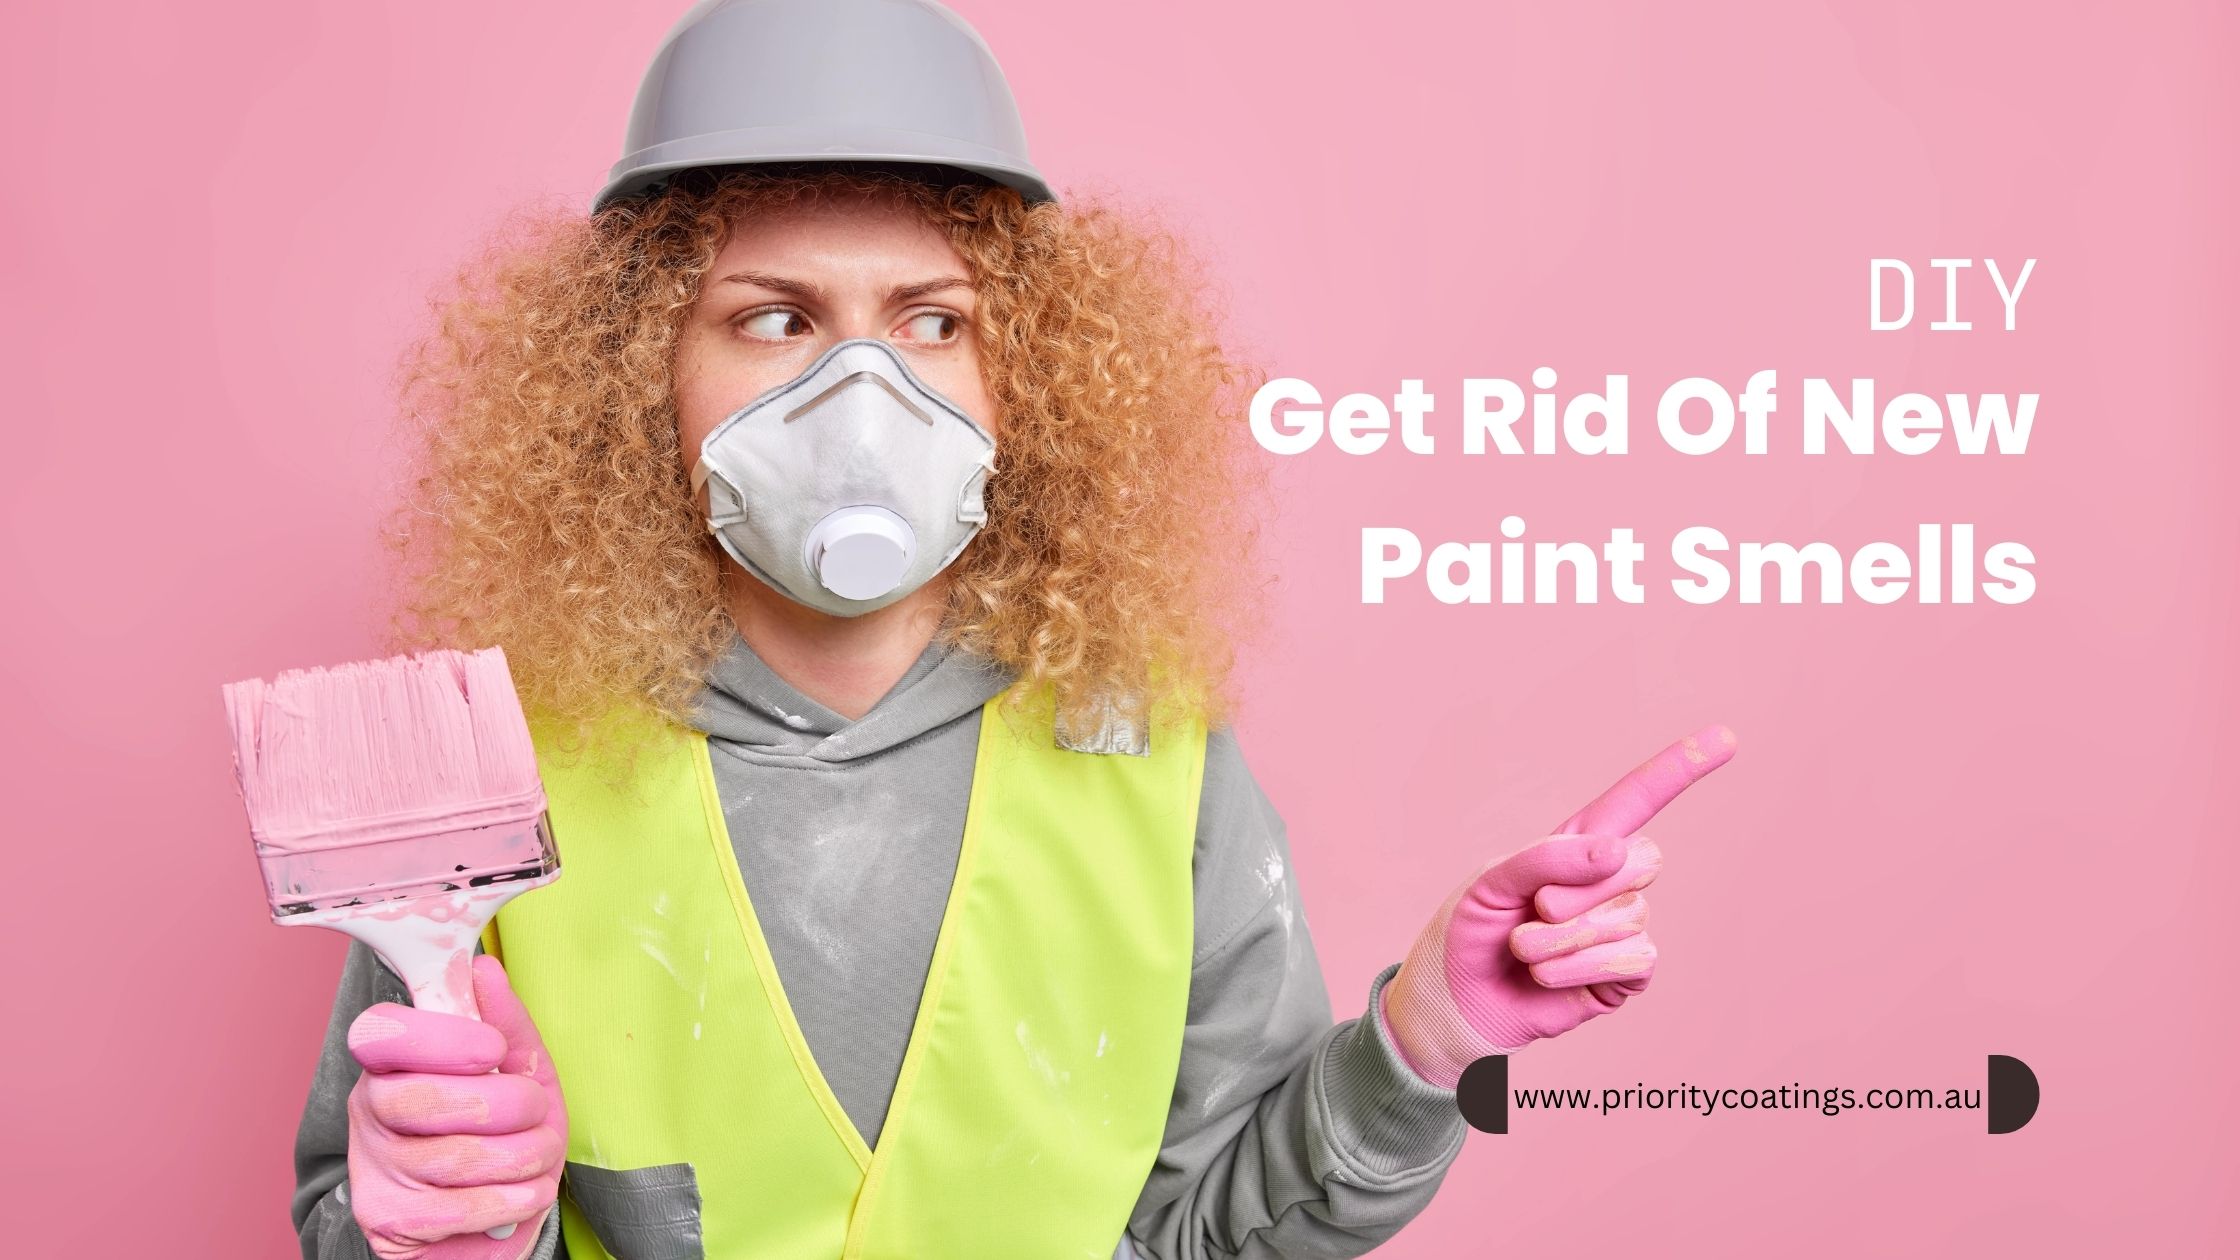 Ways to Get Rid of Paint Smells